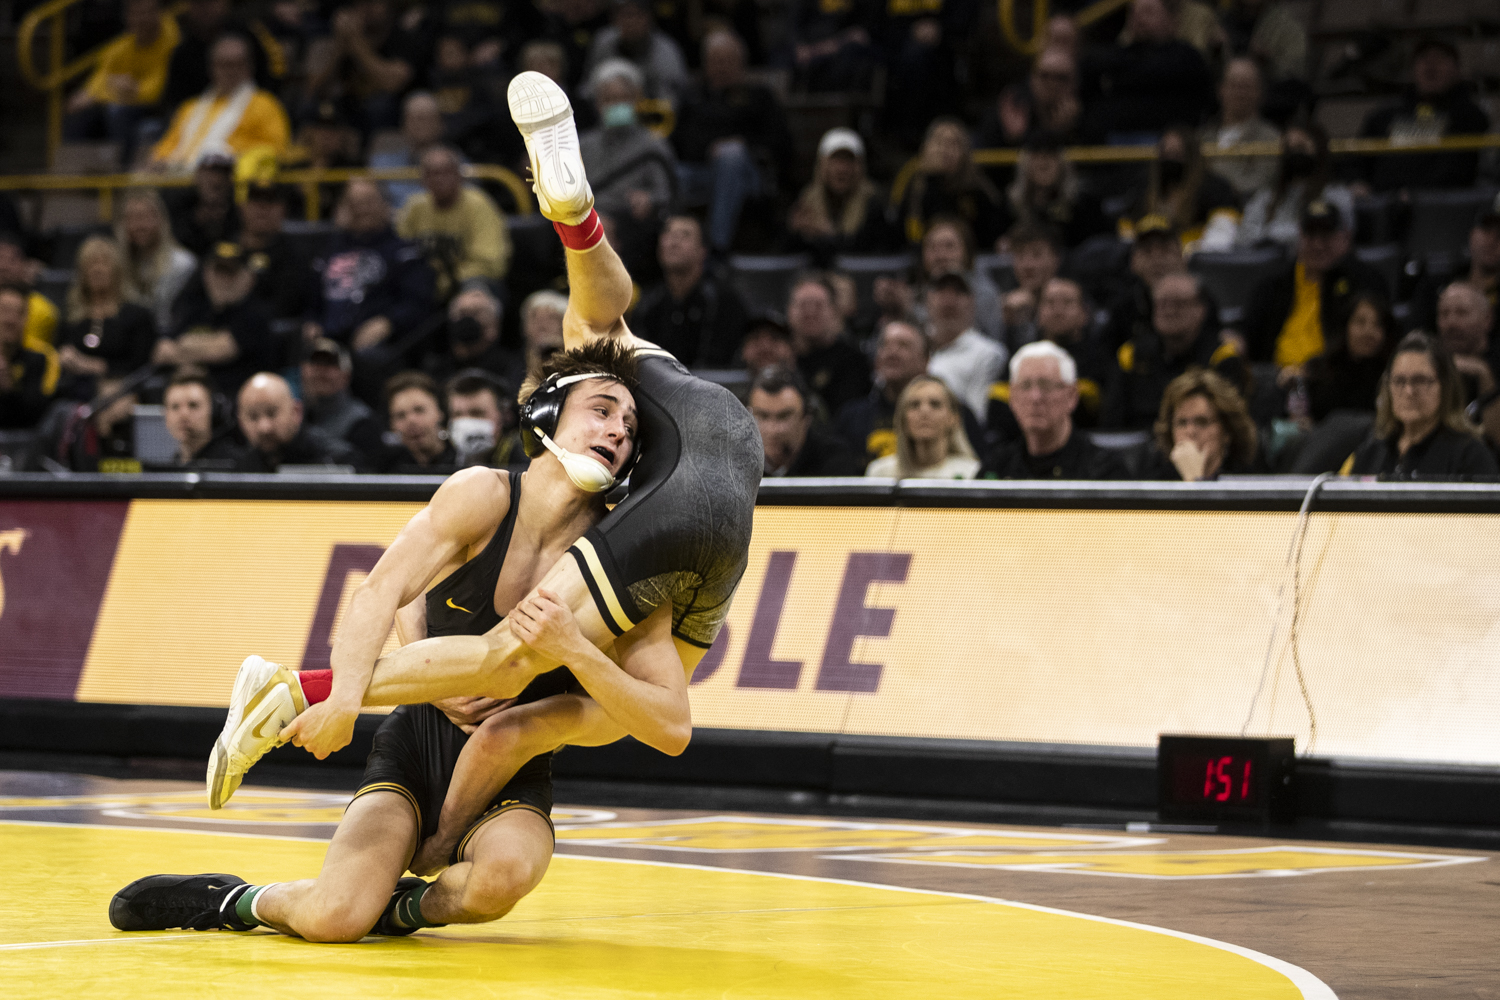 Drake Ayala earns first official win as a Hawkeye wrestler - The Daily Iowan